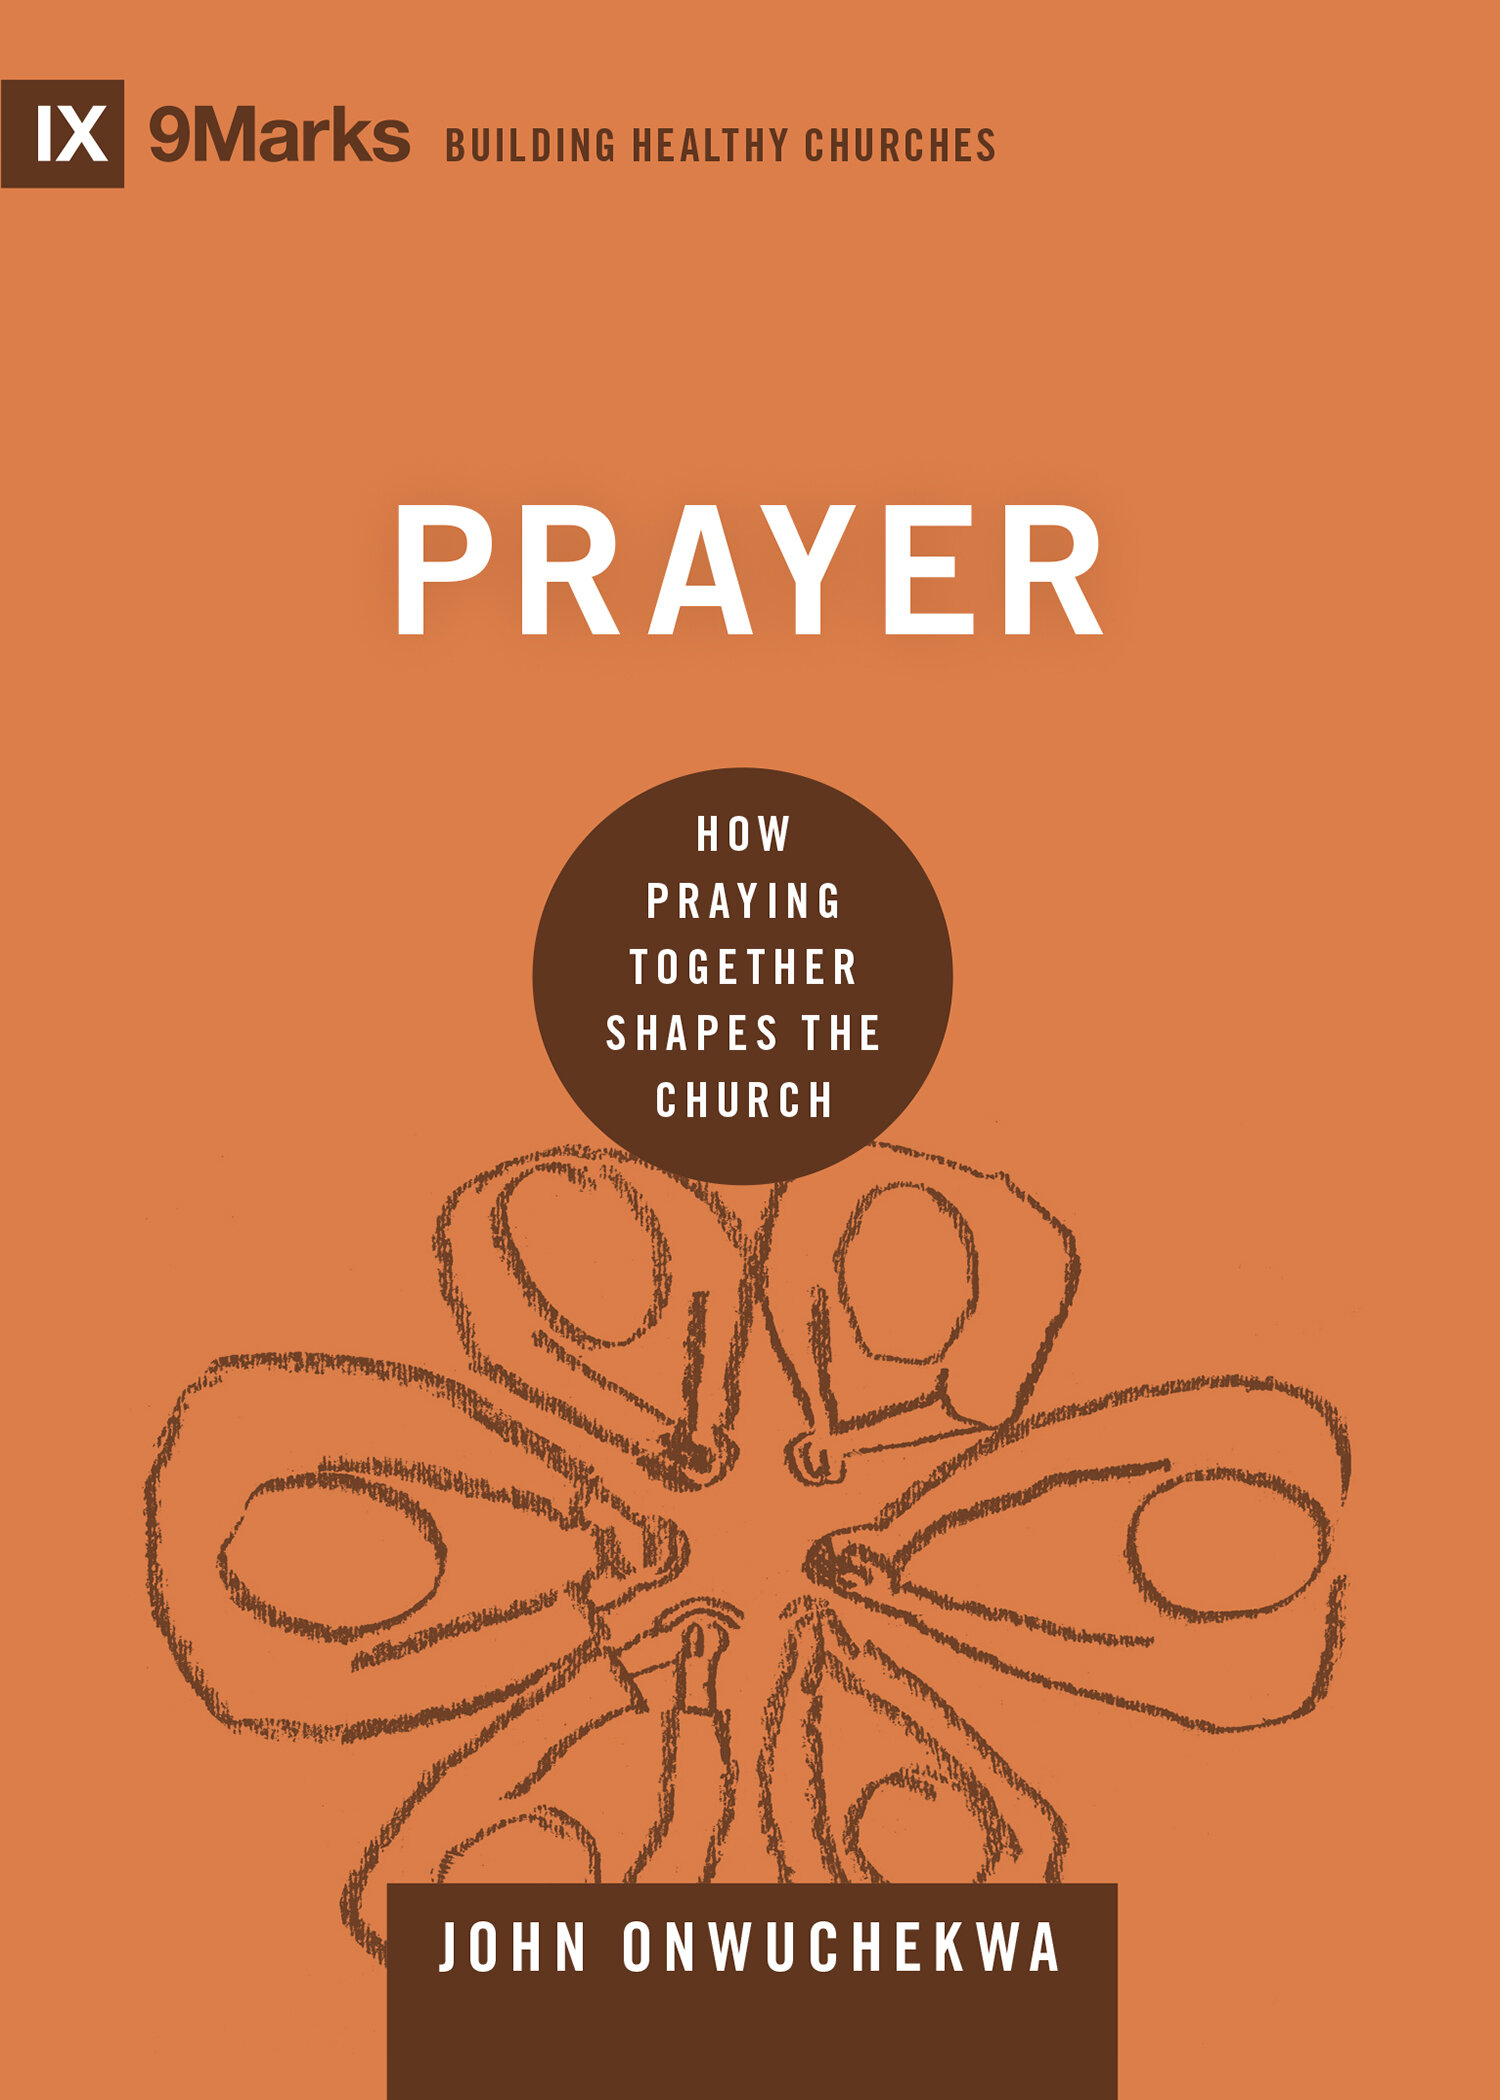 Prayer: How Praying Together Shapes the Church (9Marks Building Healthy Churches Series)